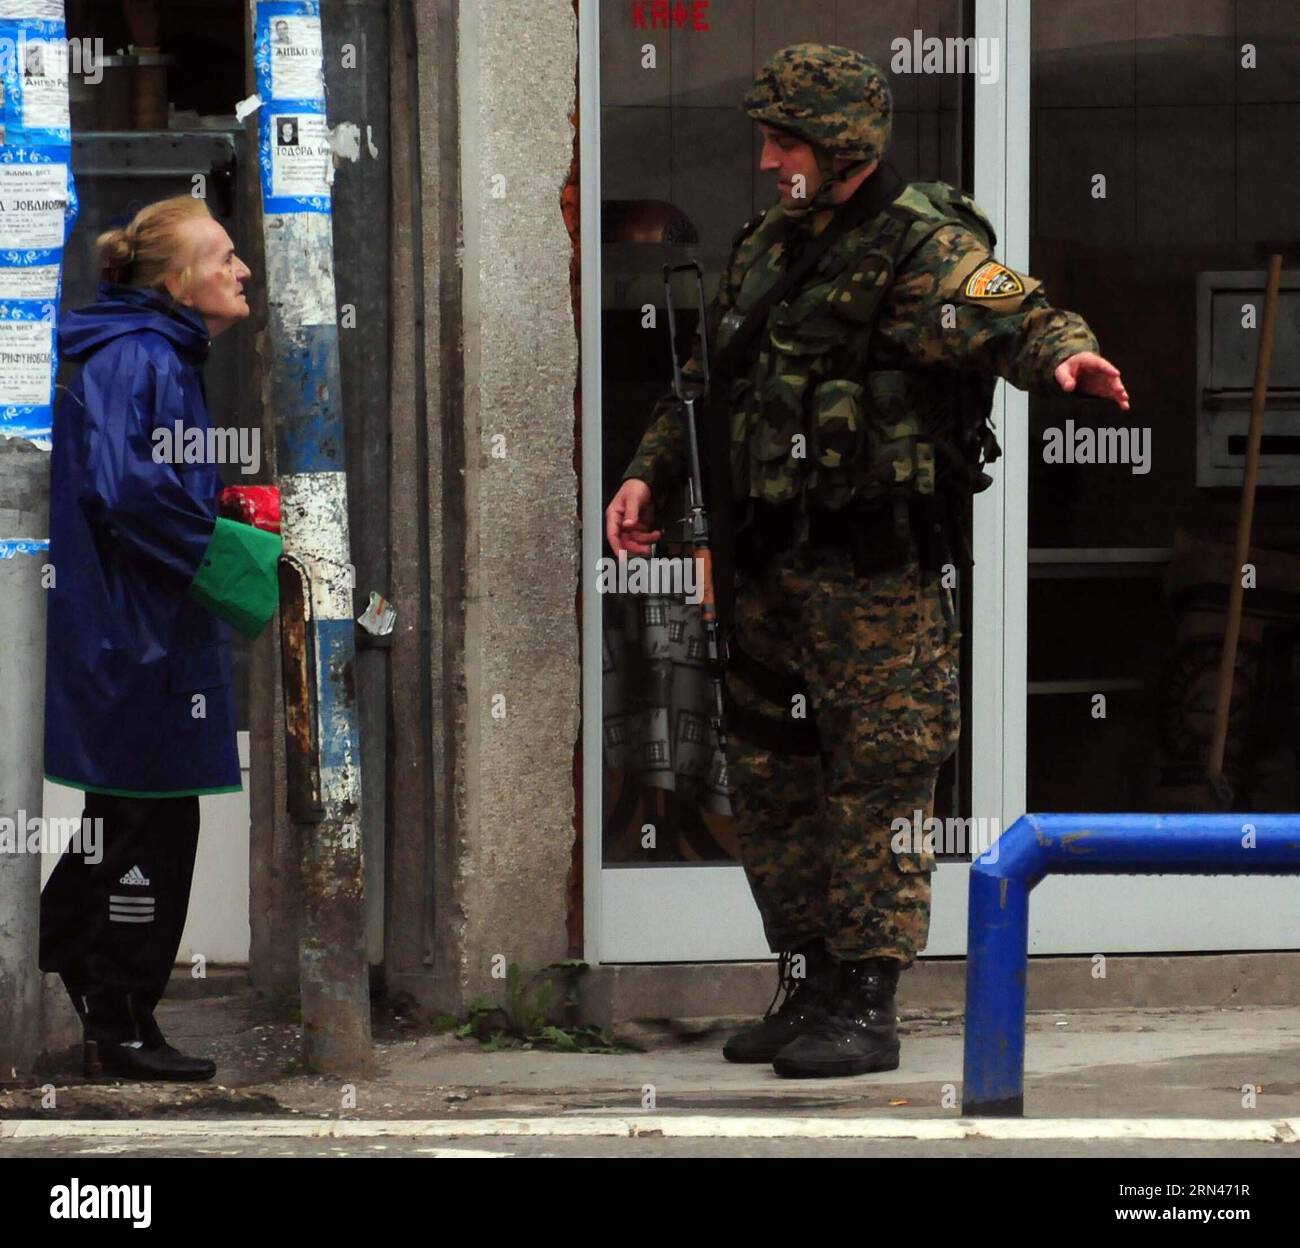 (150509) -- KUMANOVO, May 9, 2015 -- A Macedonian policeman stops a lady at a checkpoint in the town of Kumanovo in Macedon, May 9, 2015. Five Macedonian policemen were killed and more than 30 others injured in a major operation against armed group, Macedonian Interior Minister Gordana Jankuloska said Saturday evening. ) MACEDONIA-KUMANOVO-POLICE-OPERATION MIA PUBLICATIONxNOTxINxCHN   150509 Kumanovo May 9 2015 a Macedonian Policeman Stops a Lady AT a Checkpoint in The Town of Kumanovo in Macedon May 9 2015 Five Macedonian Policemen Were KILLED and More than 30 Others Injured in a Major Operat Stock Photo